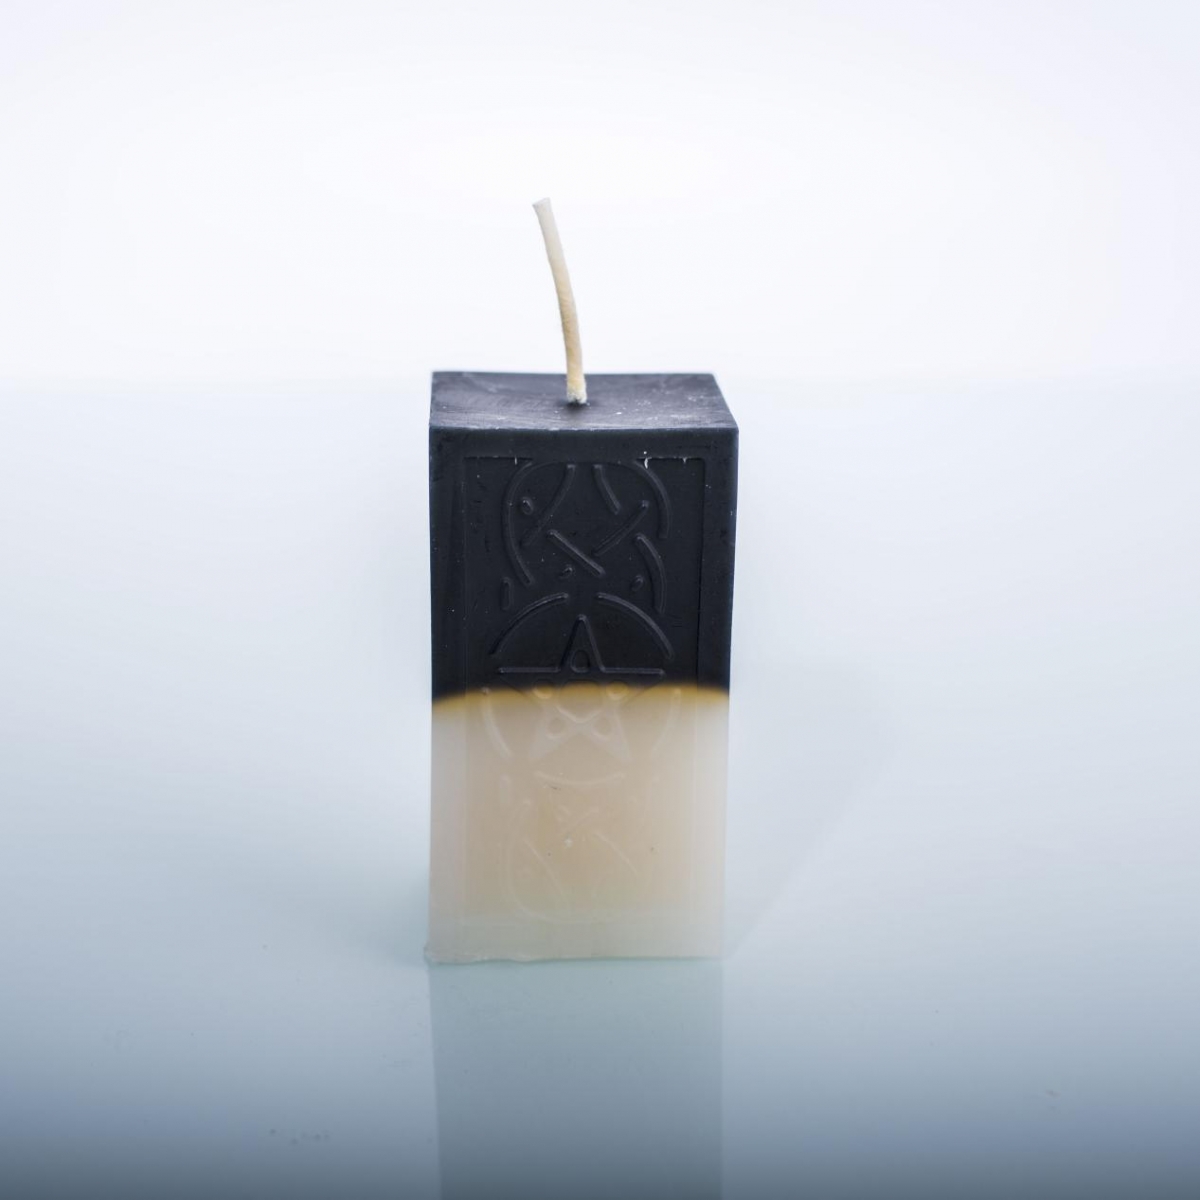 Ritual Candles :Cube Candle , Carved Witchcraft LOGO ,White Black Gradient Color ,China Factory ,Wholesale Price-HOWCANDLE-Candles,Scented Candles,Aromatherapy Candles,Soy Candles,Vegan Candles,Jar Candles,Pillar Candles,Candle Gift Sets,Essential Oils,Reed Diffuser,Candle Holder,